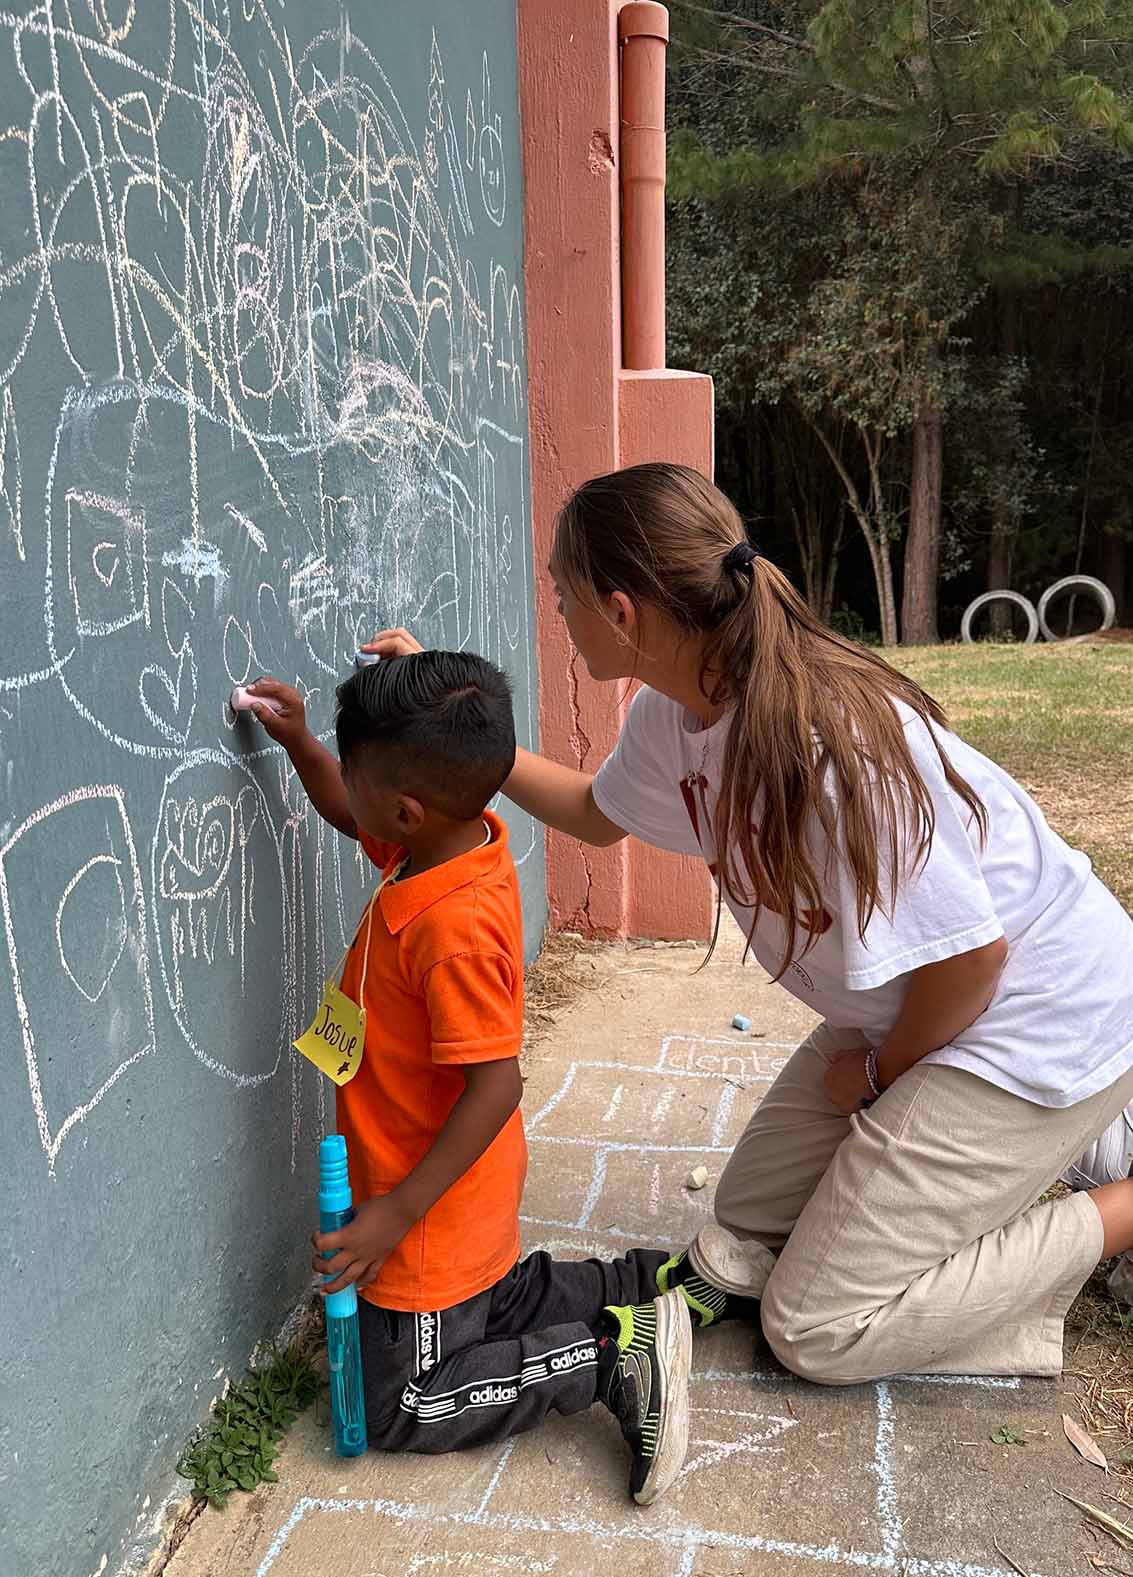 Mission trip participant and boy from Guatemala draw with chalk